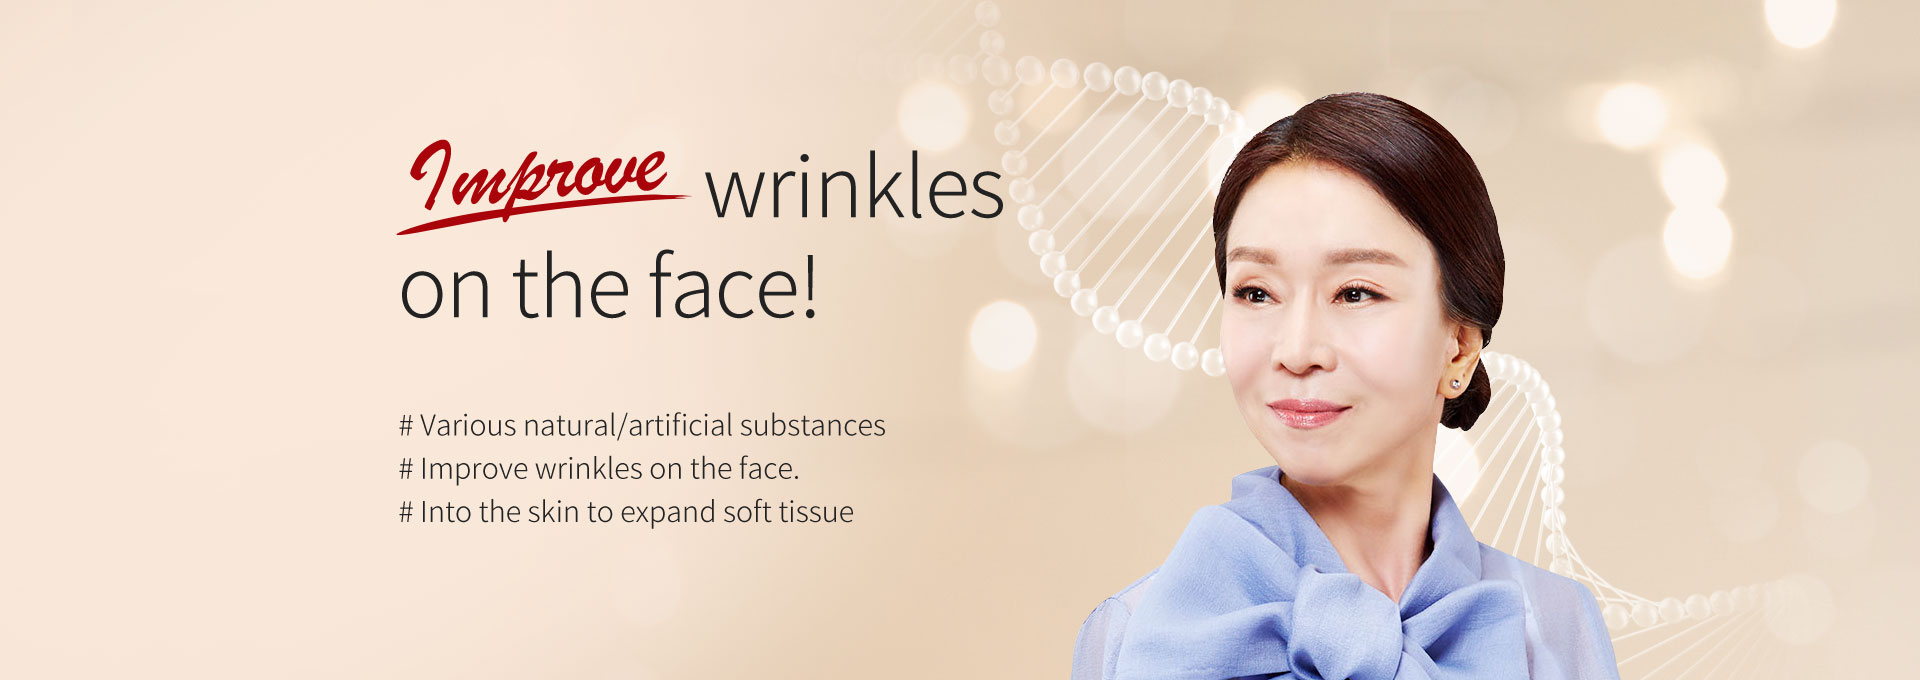 Improve wrinkles on the face!